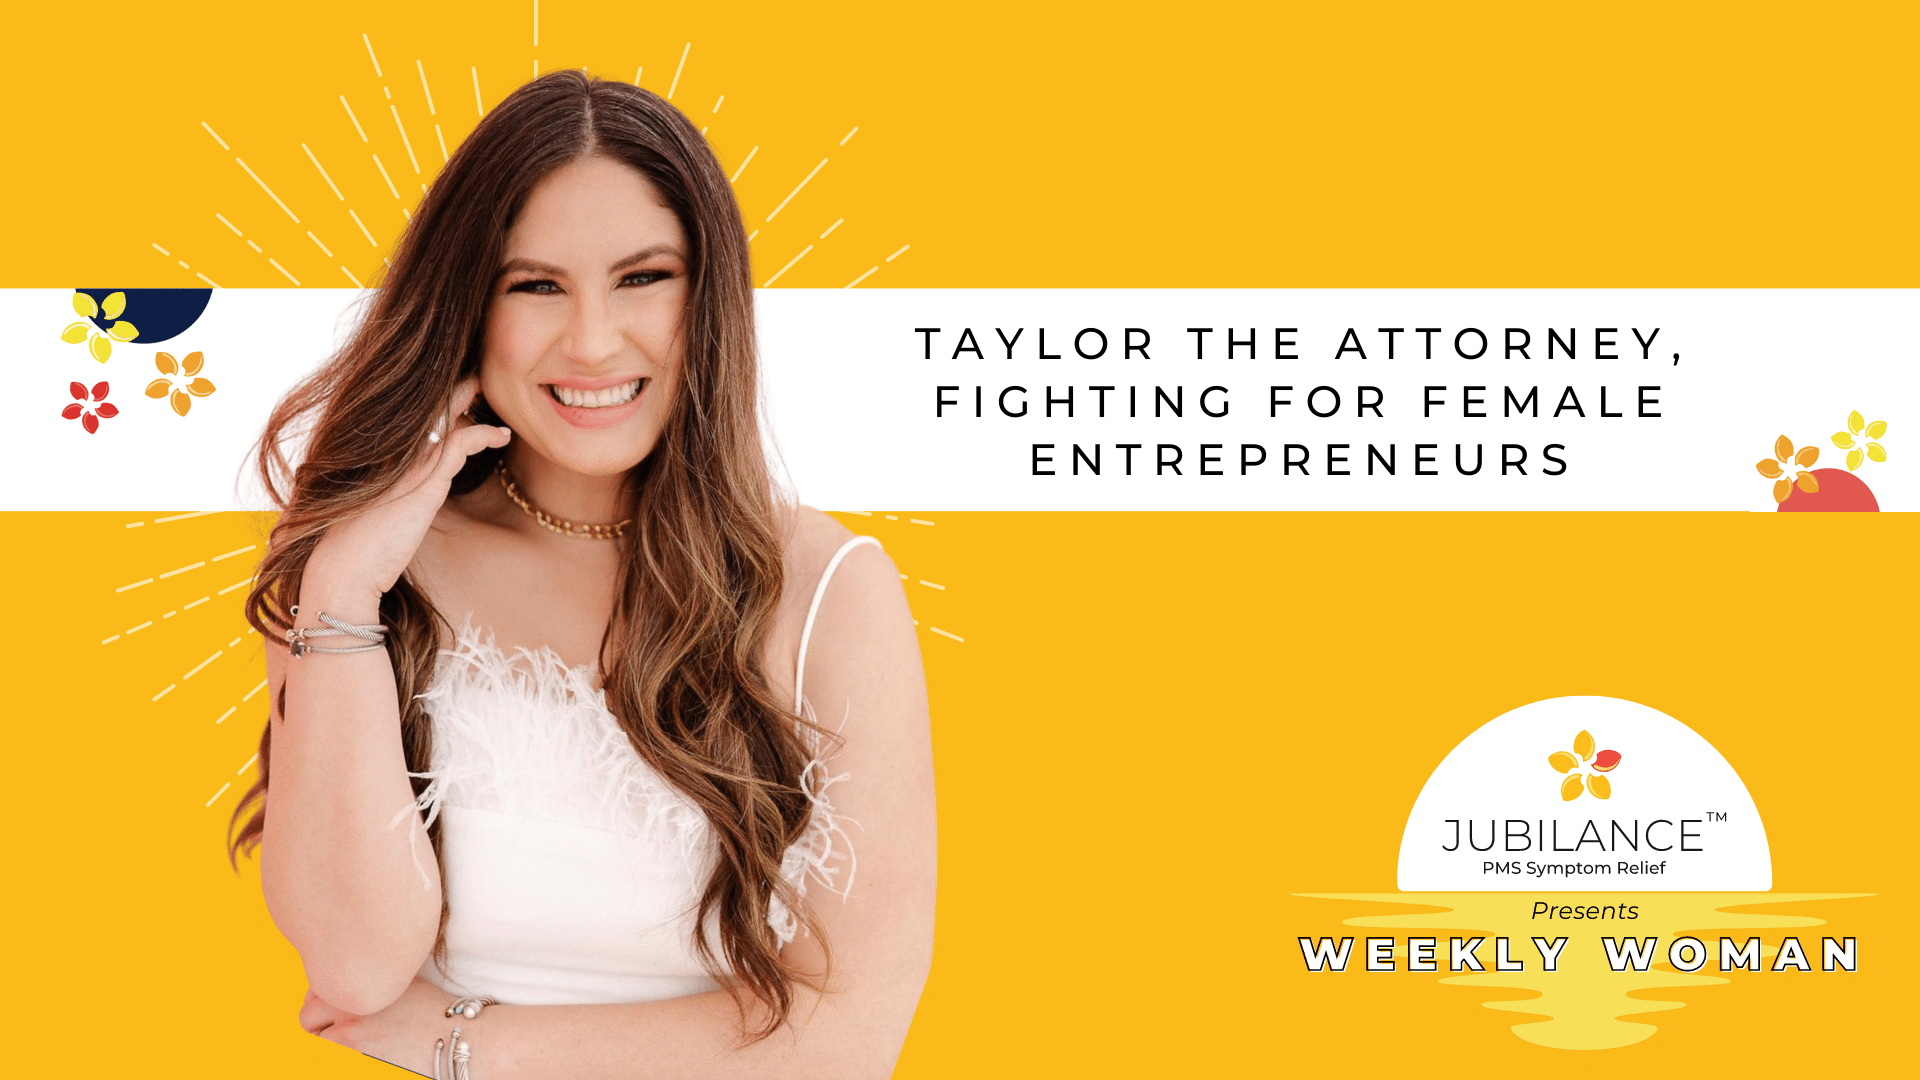 Taylor the Attorney fights for female entrepreneurs with her legal aid and she smiles out at the camera.